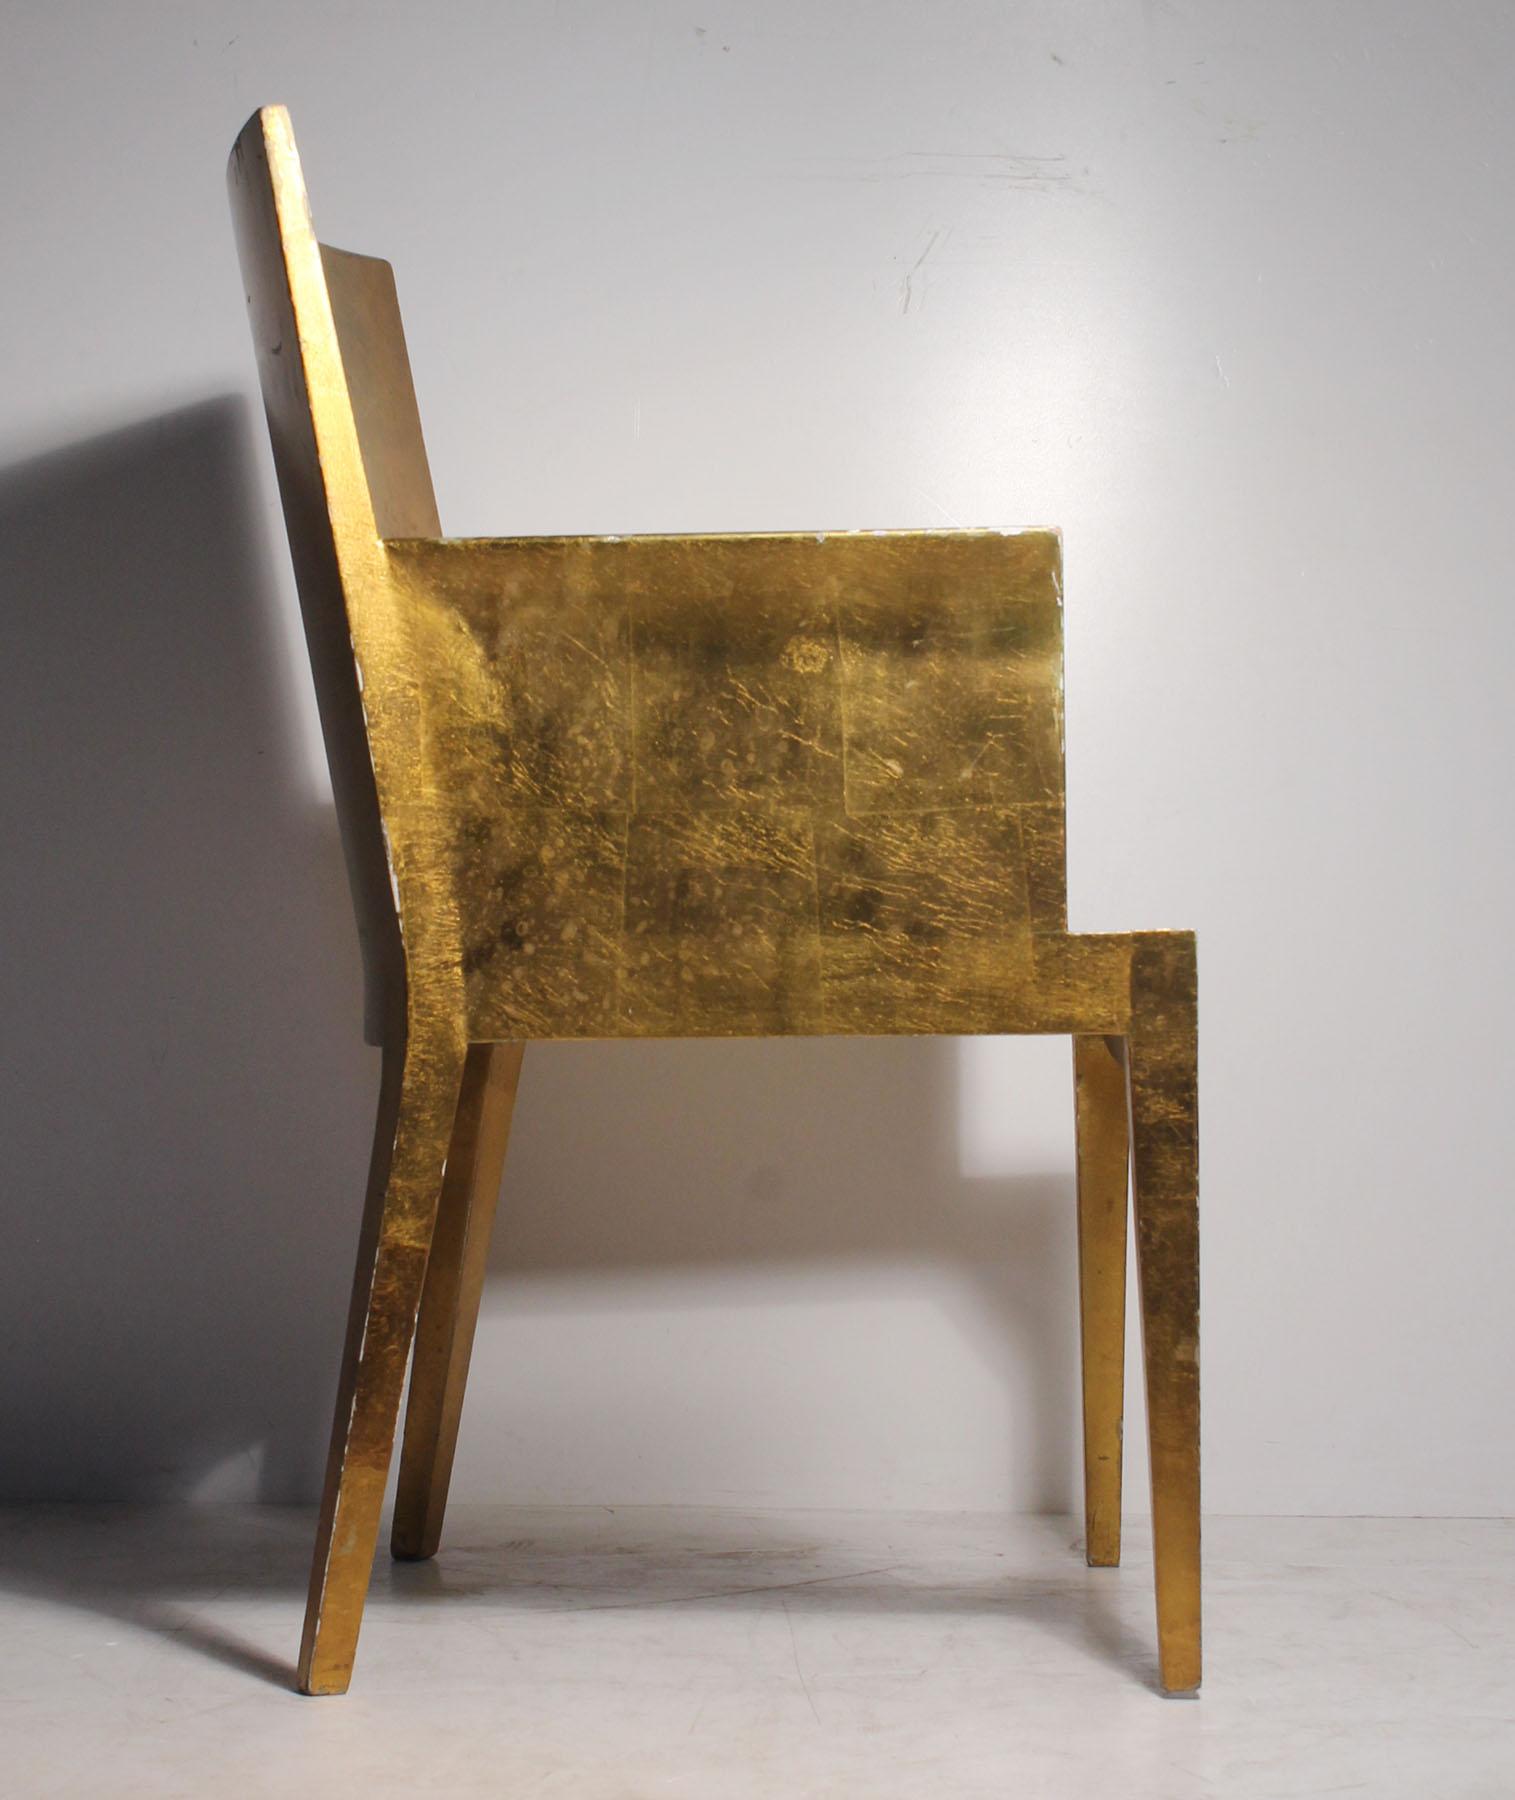 Vintage Karl Springer JMF Armchair (Gilt) by Enrique Garcel for Jimeco In Good Condition For Sale In Chicago, IL